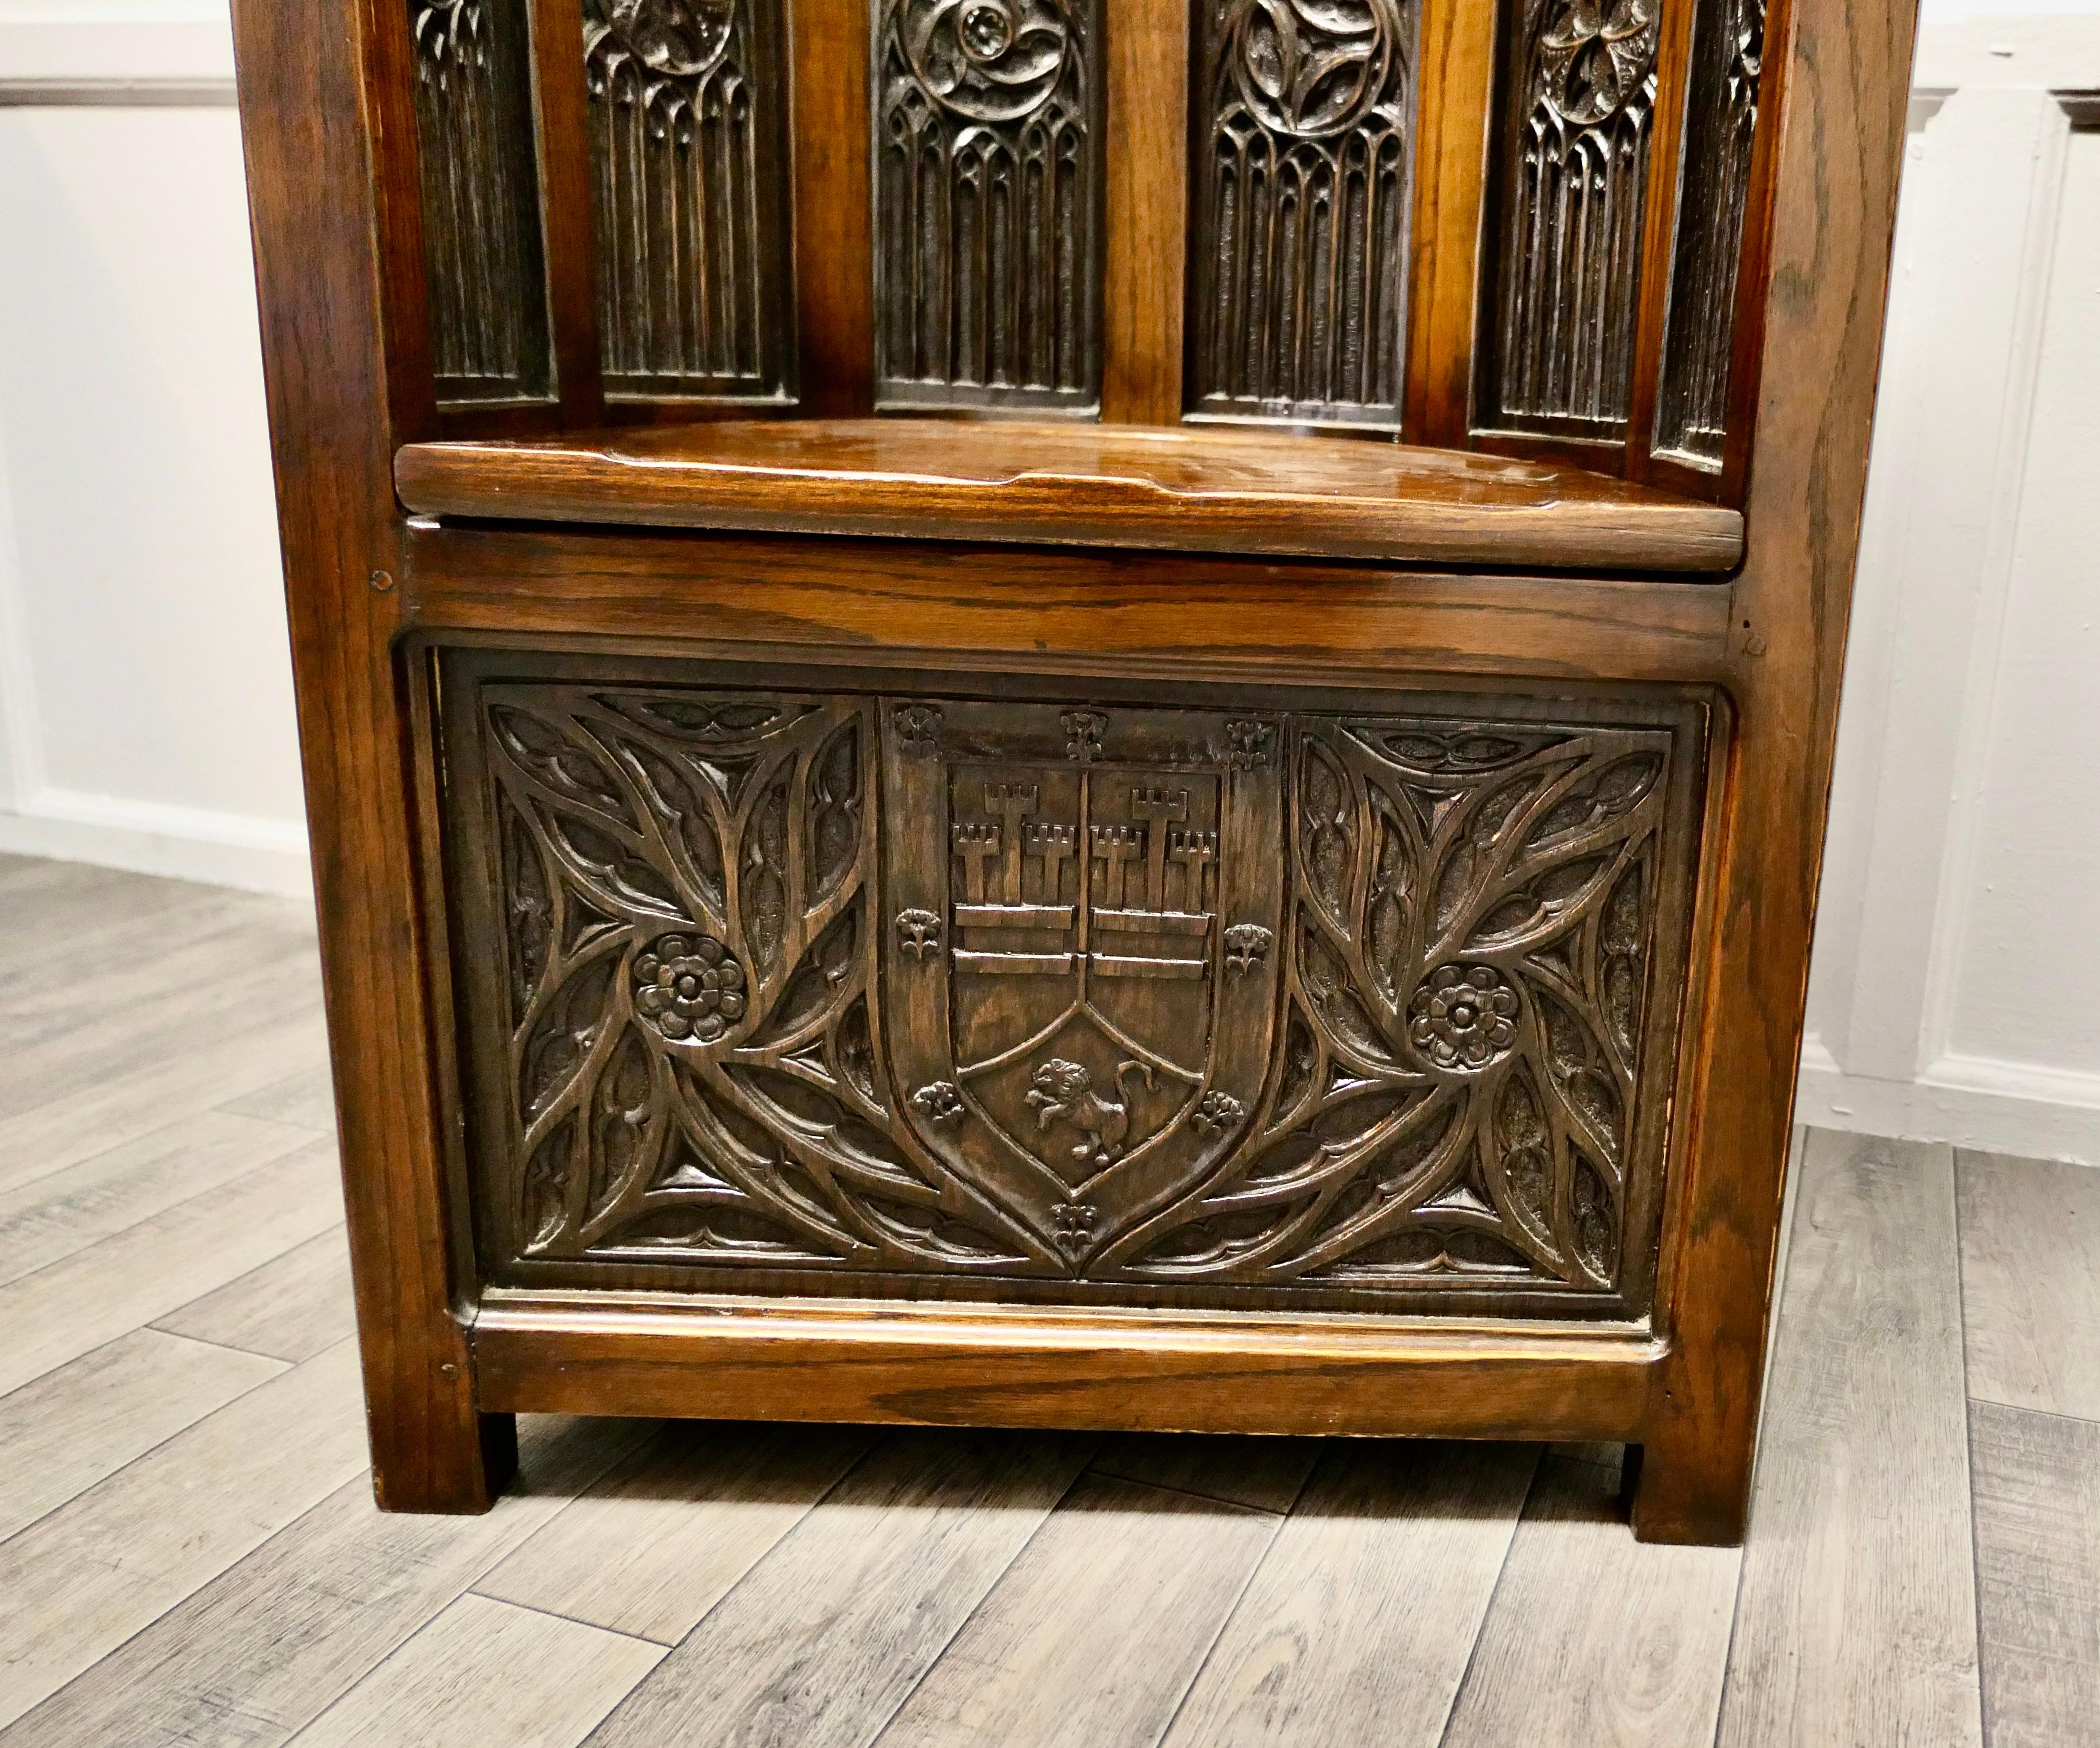 Gothic Revival Pugin Inspired Arts and Crafts Carved Barrel Back Hall Chairs For Sale